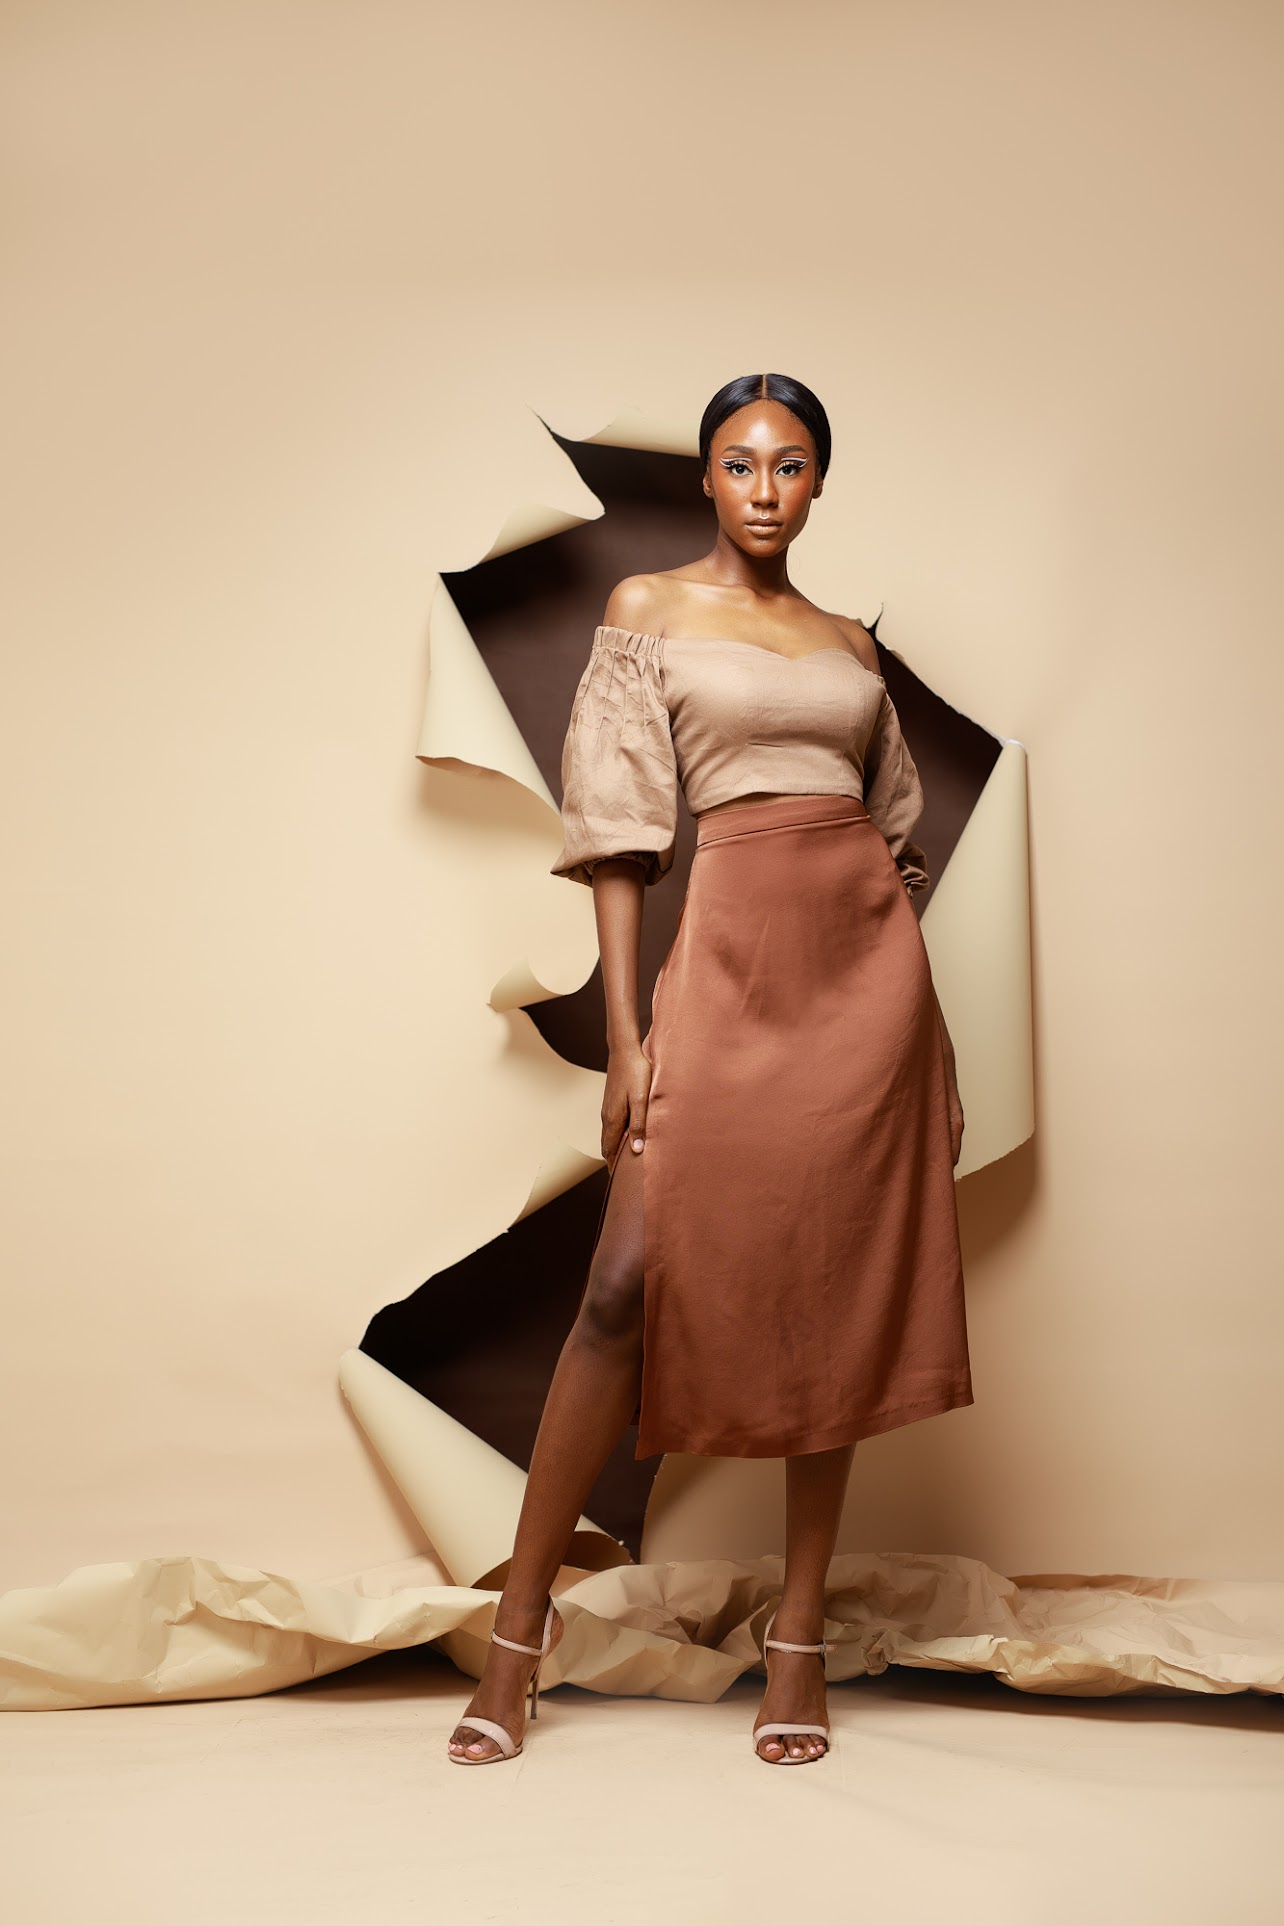 The New Be Naya Collection Is For Women Of Every Shape And Size | BN Style